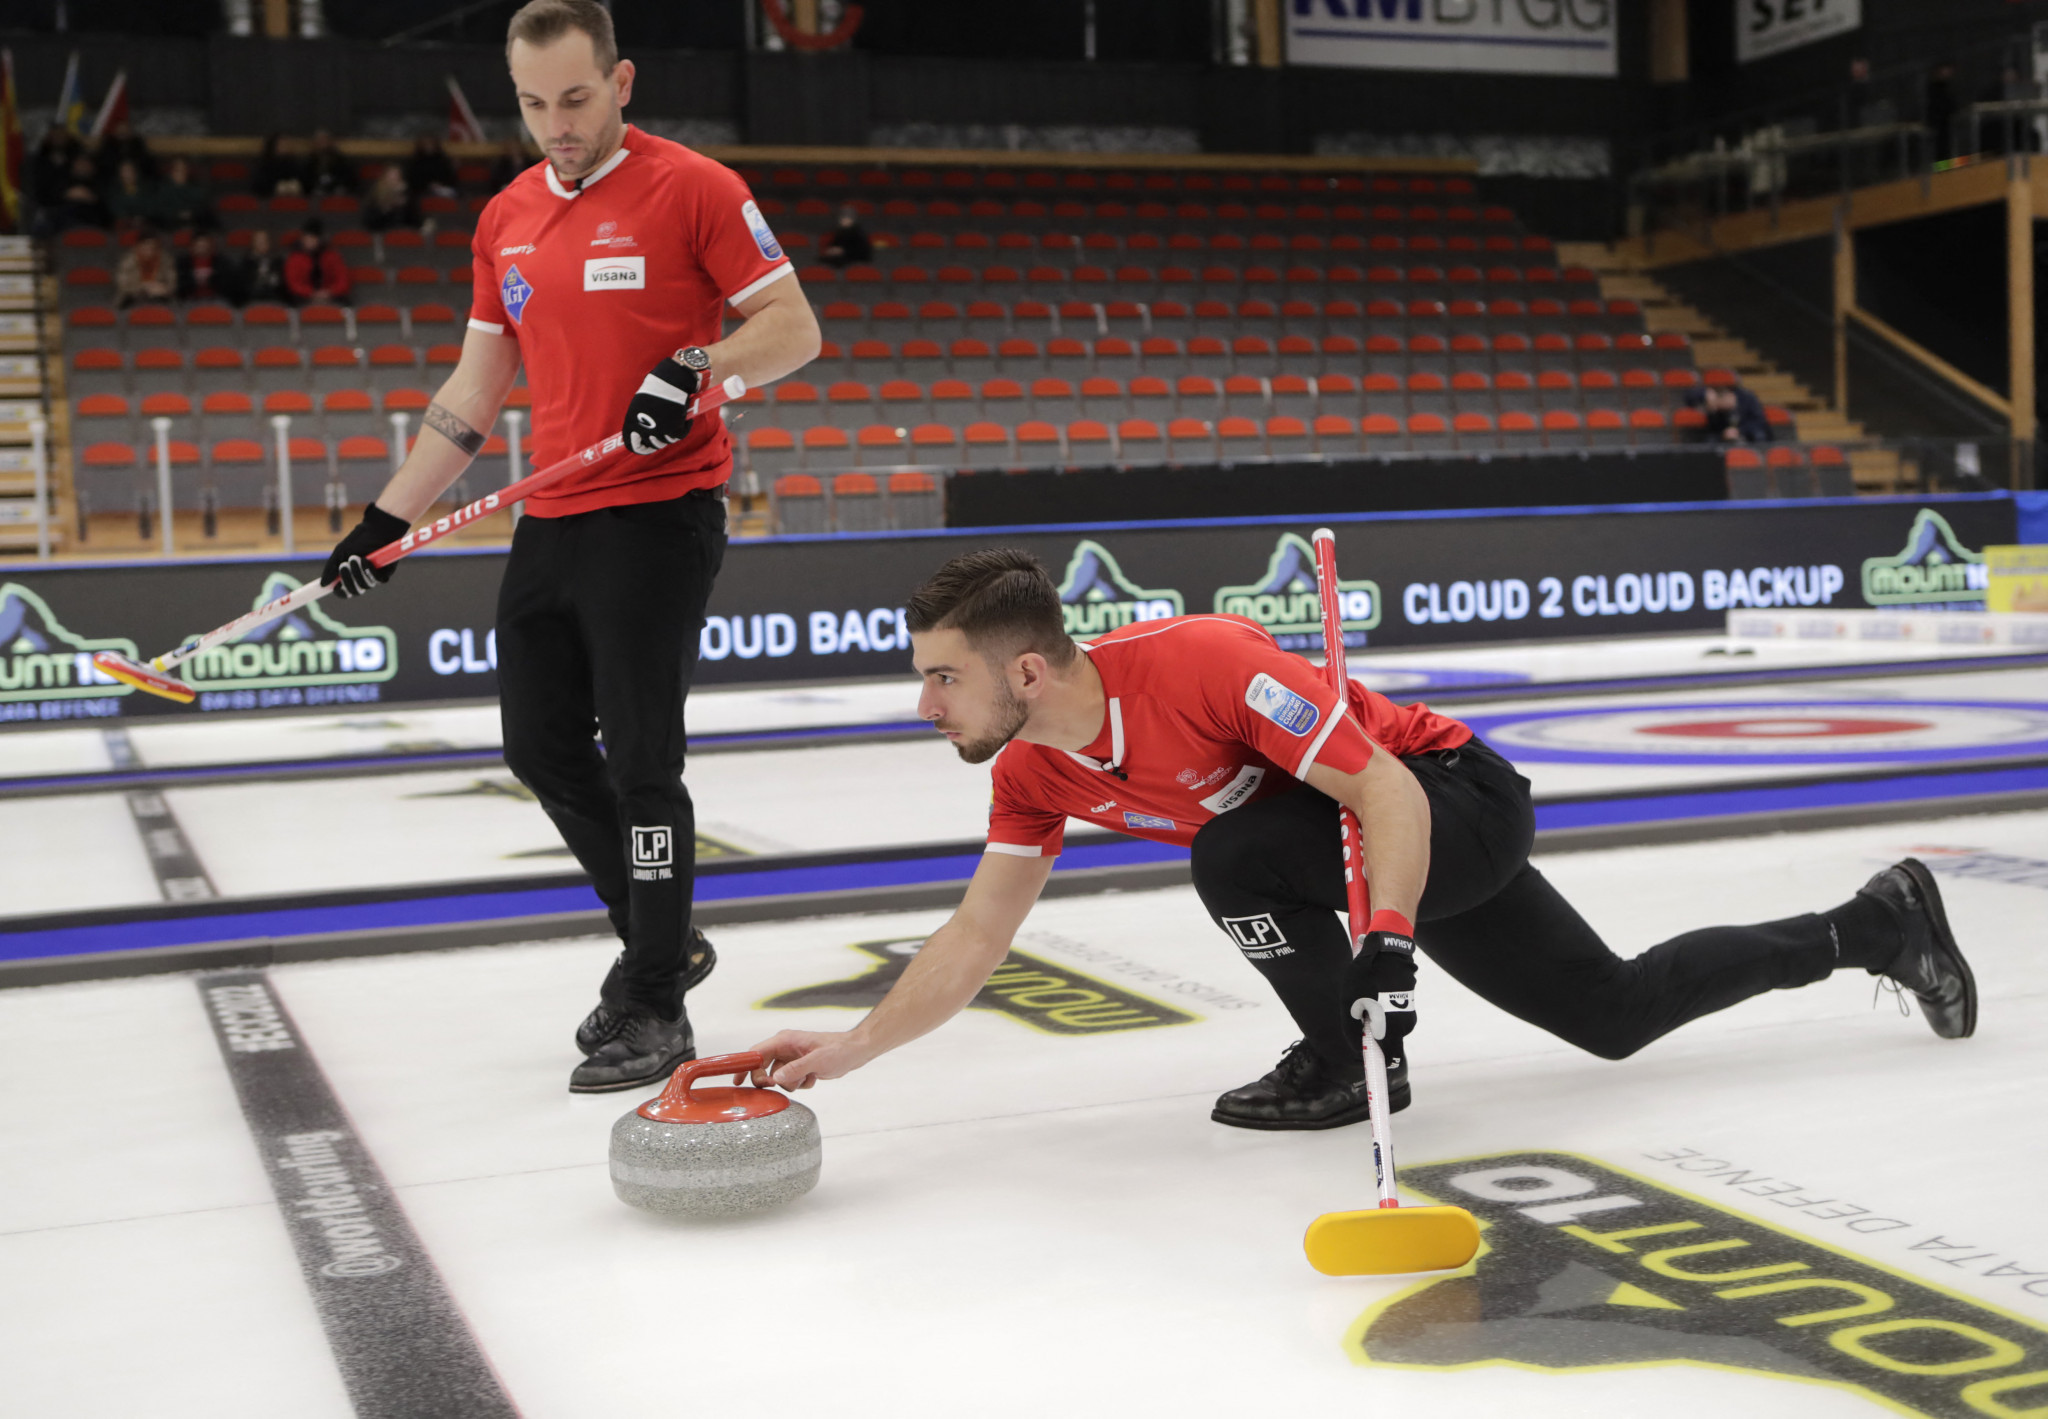 Östersund awarded World Mixed Doubles and World Senior Curling Championships